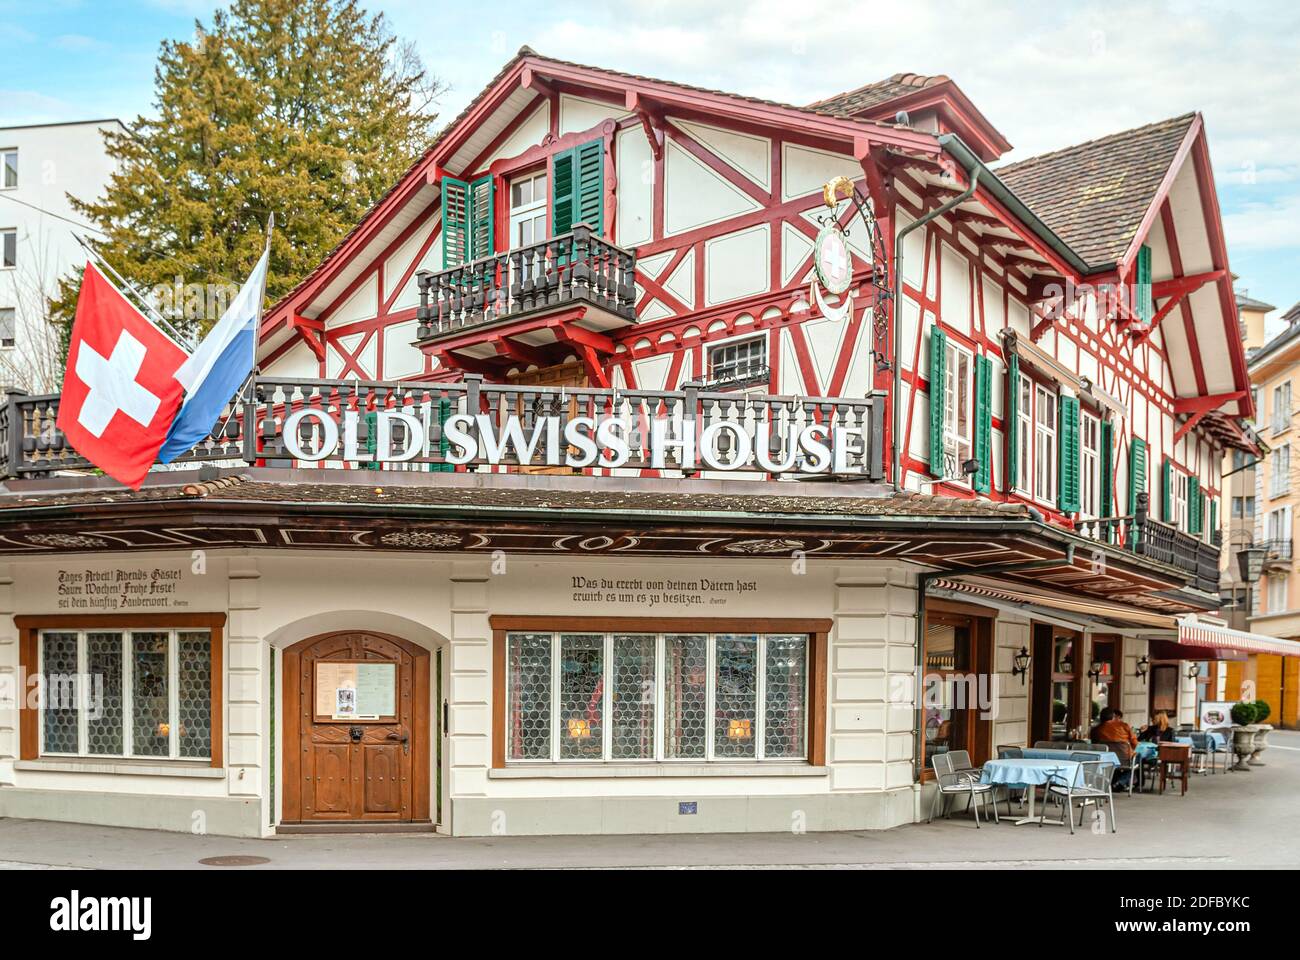 The 'Old Swiss House' restaurant, a Landmark in the old town of Lucerne, built in 1858. Stock Photo